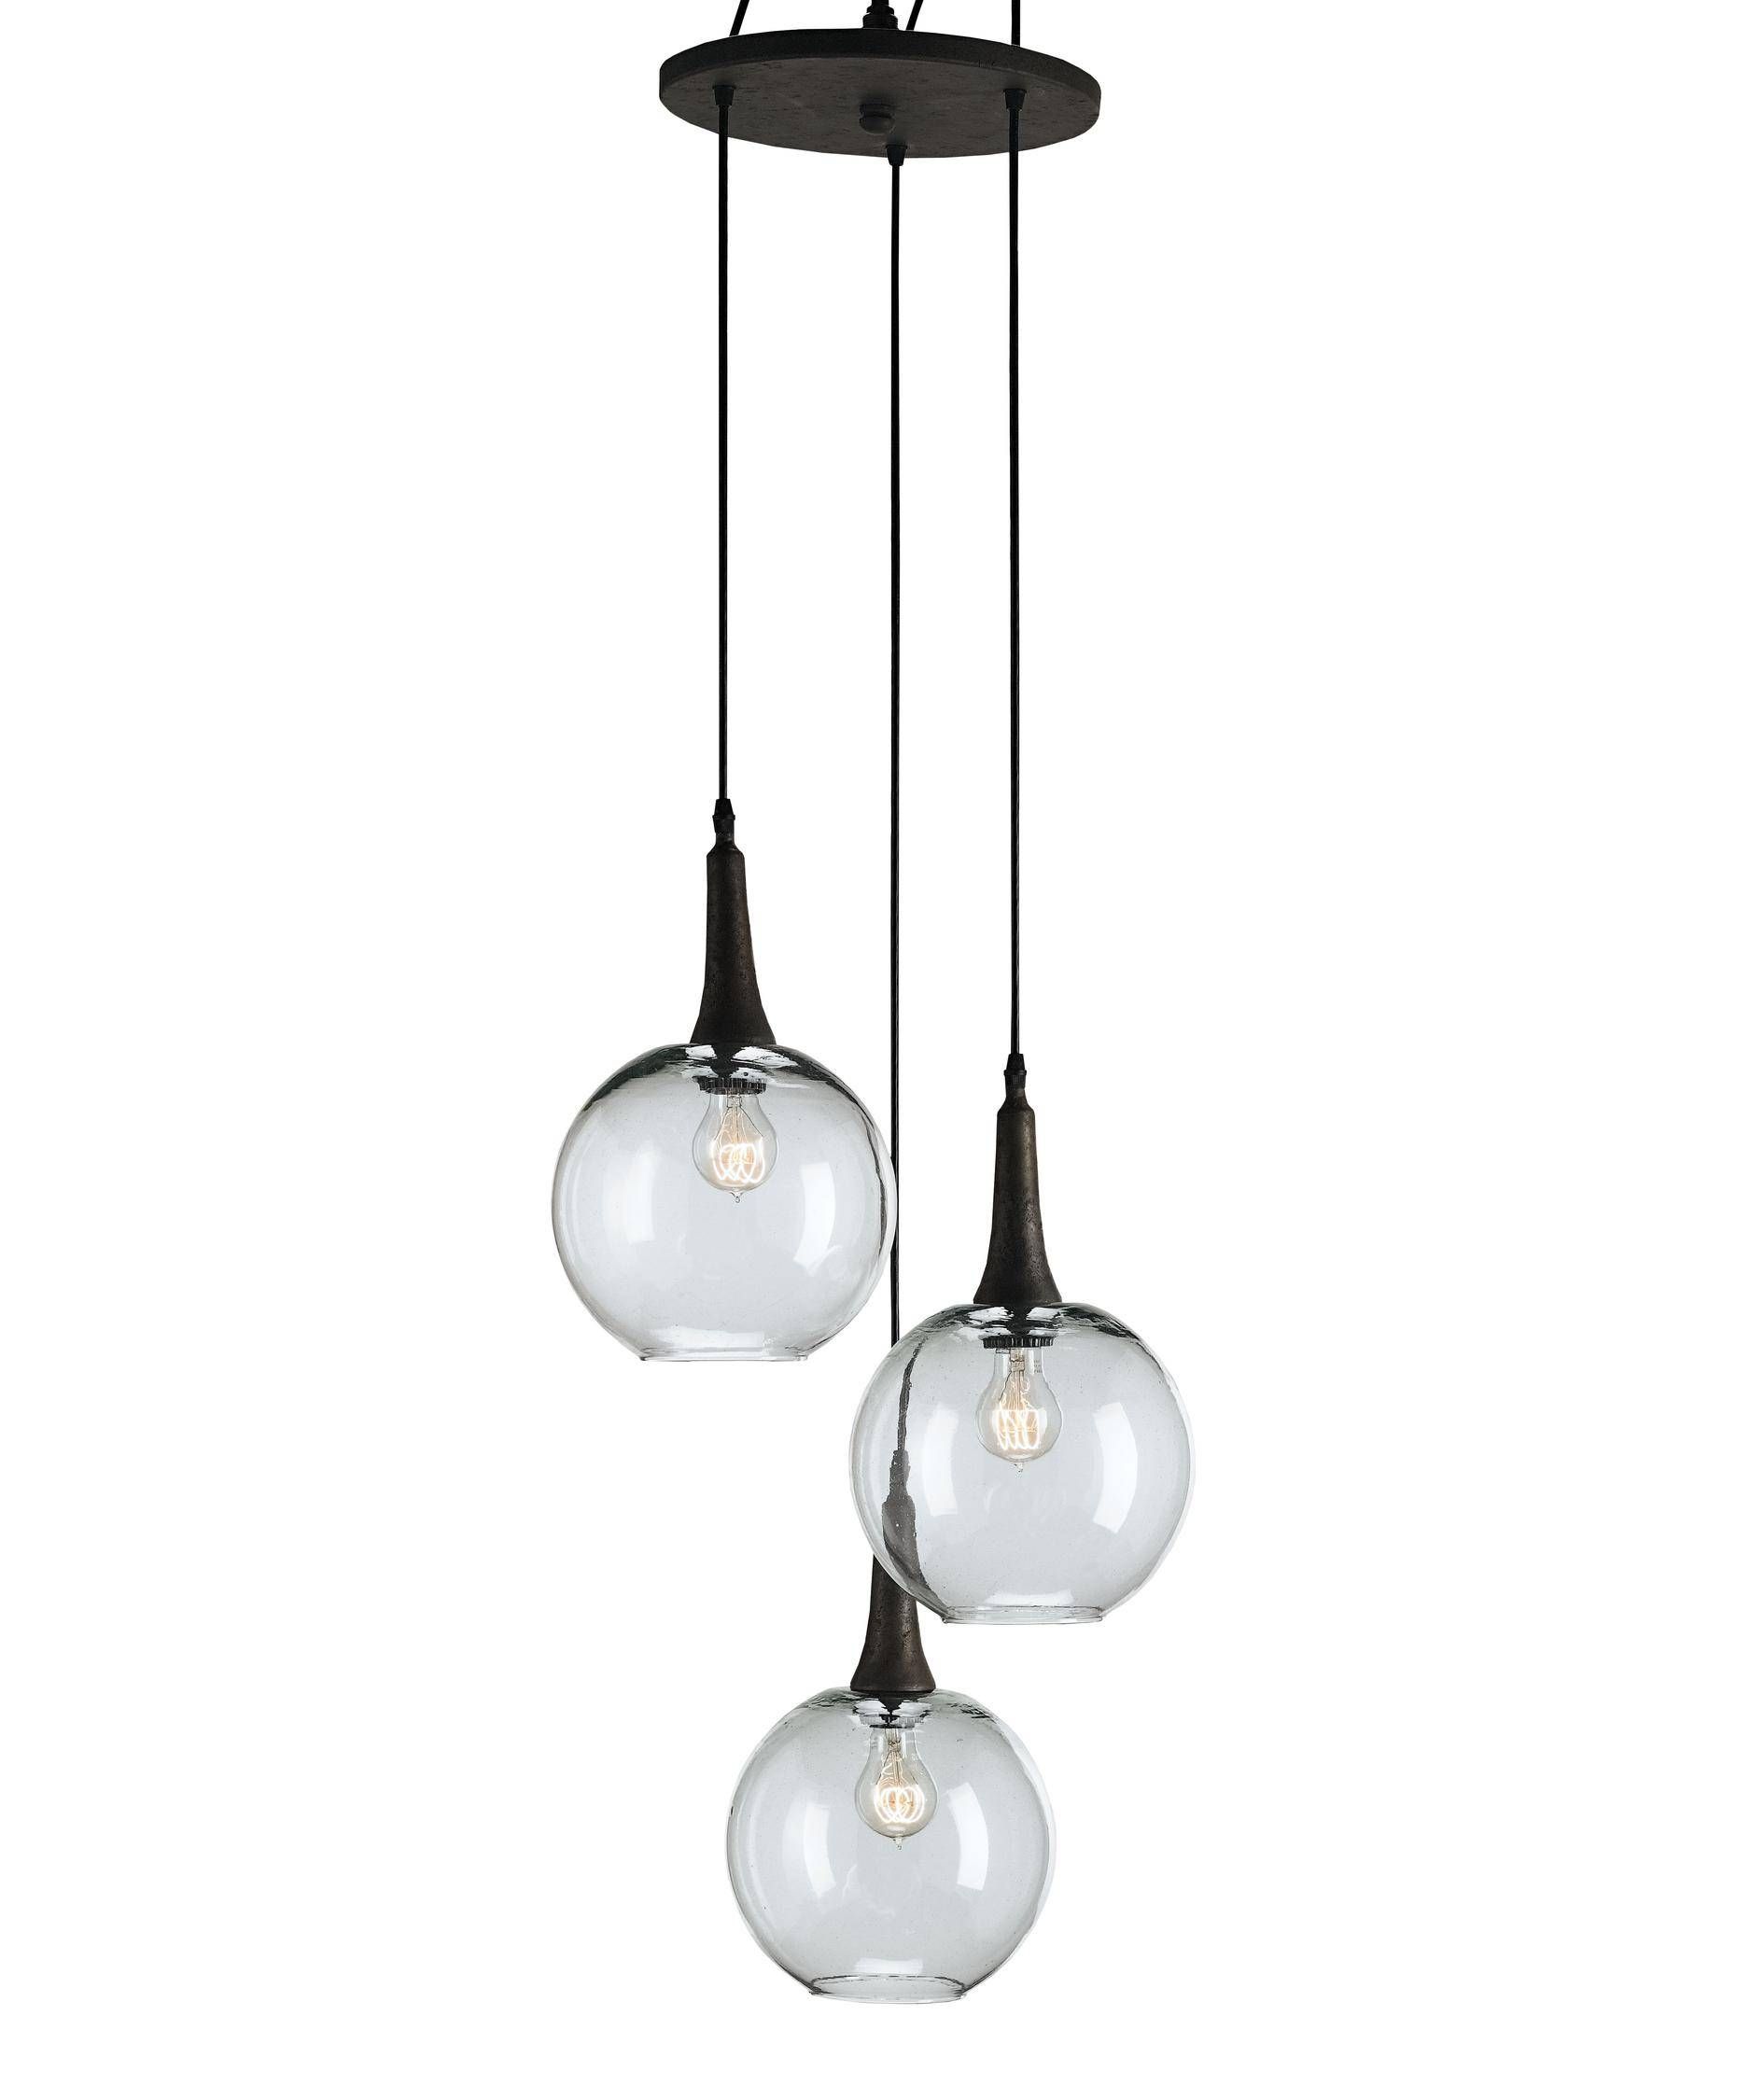 Currey And Company 9969 Beckett Trio 3 Light Multi Pendant Light Within Multiple Pendant Lights Kits (View 5 of 15)